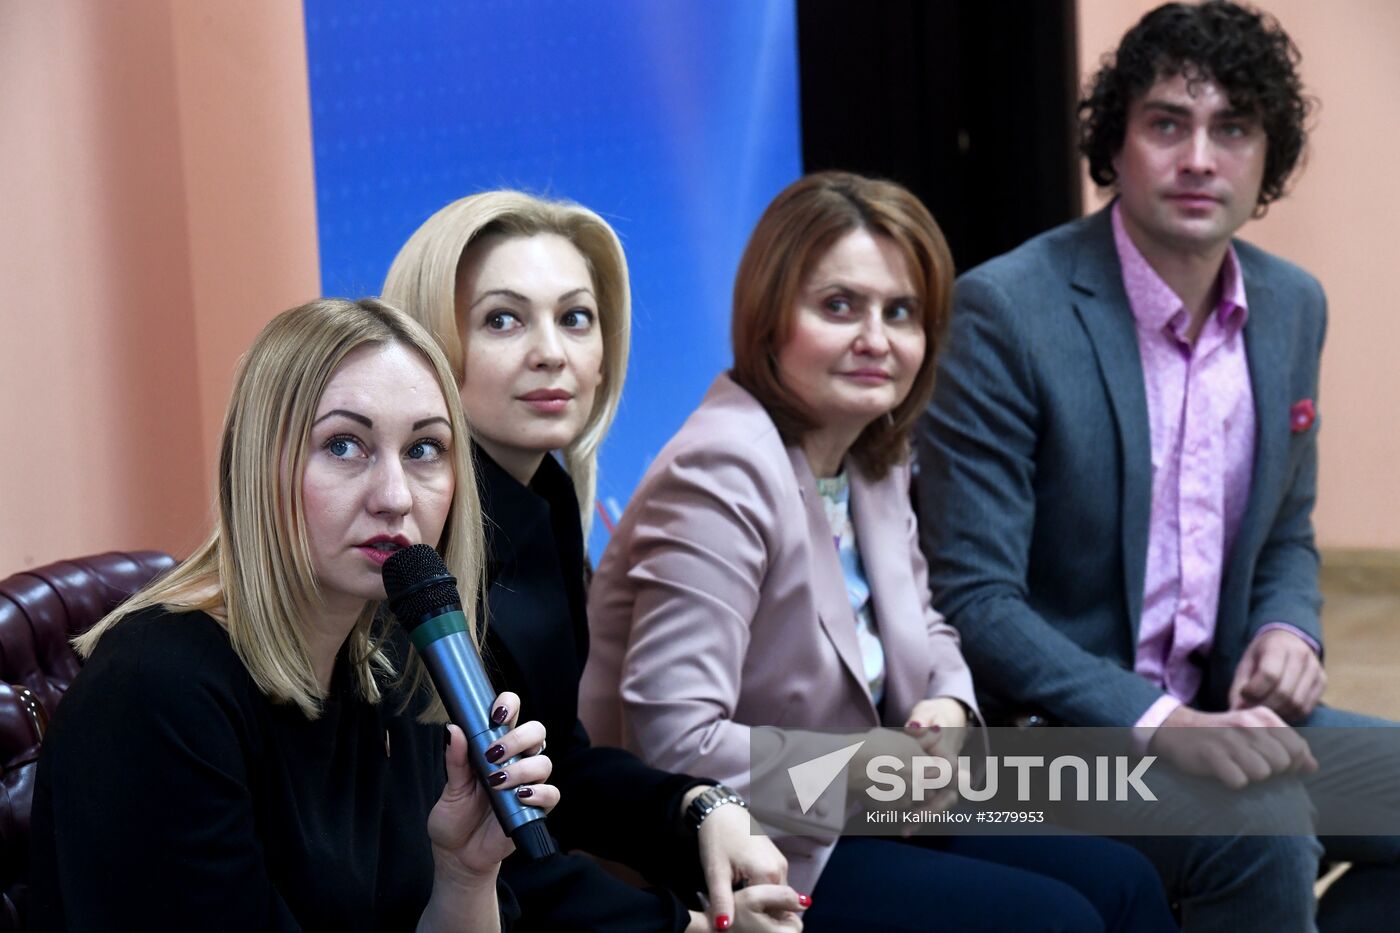 News conference on Russian presidential election themed poster competition